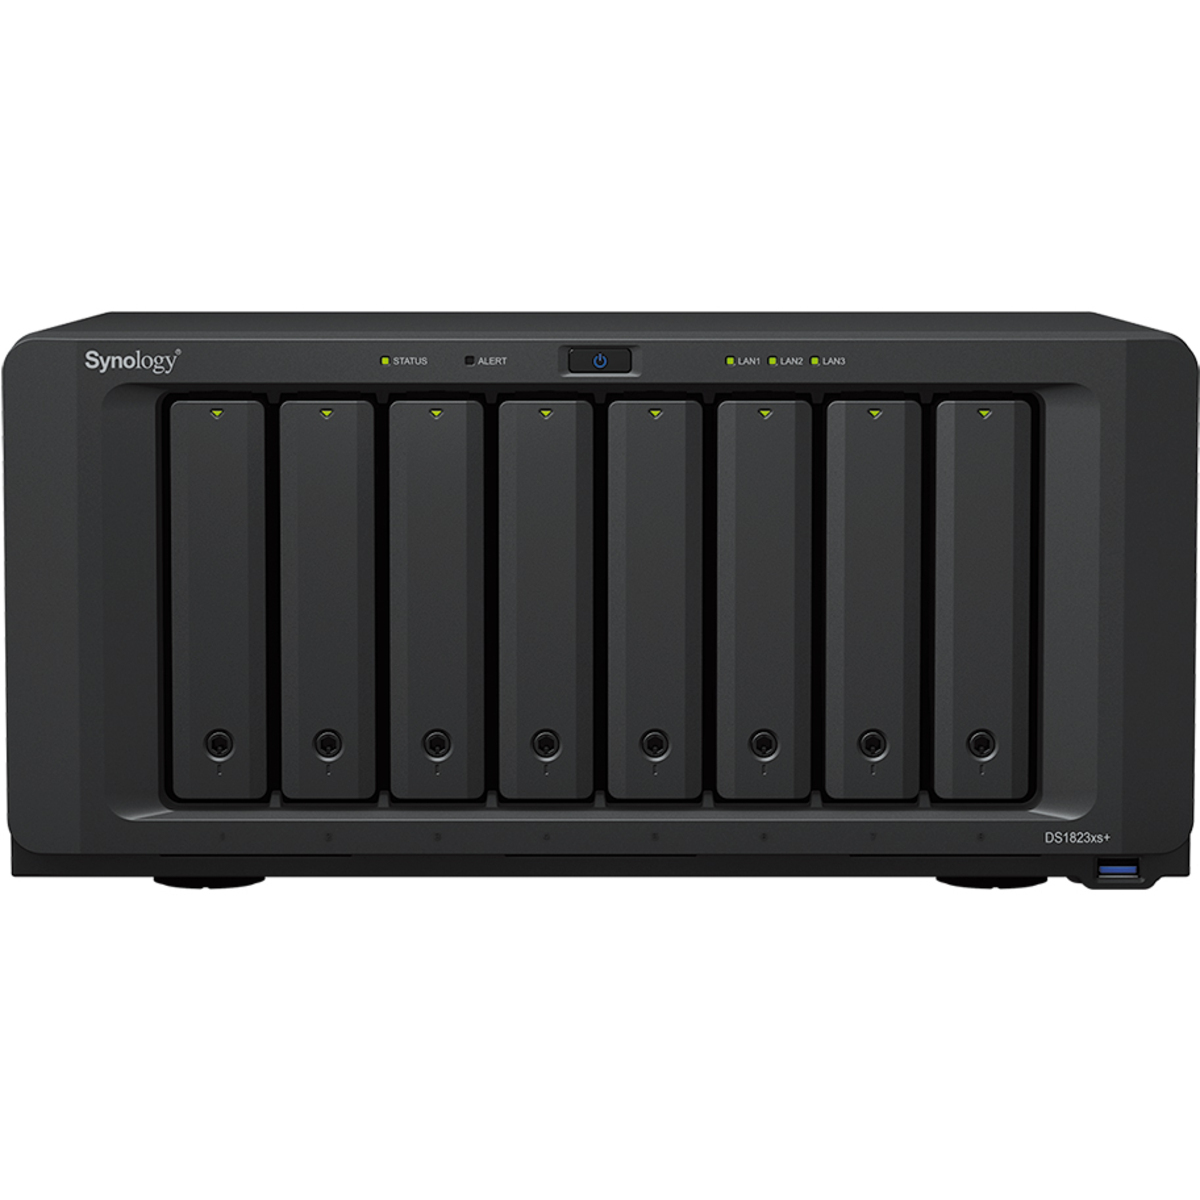 Synology DiskStation DS1823xs+ 140tb 8-Bay Desktop Multimedia / Power User / Business NAS - Network Attached Storage Device 7x20tb Western Digital Red Pro WD201KFGX 3.5 7200rpm SATA 6Gb/s HDD NAS Class Drives Installed - Burn-In Tested DiskStation DS1823xs+